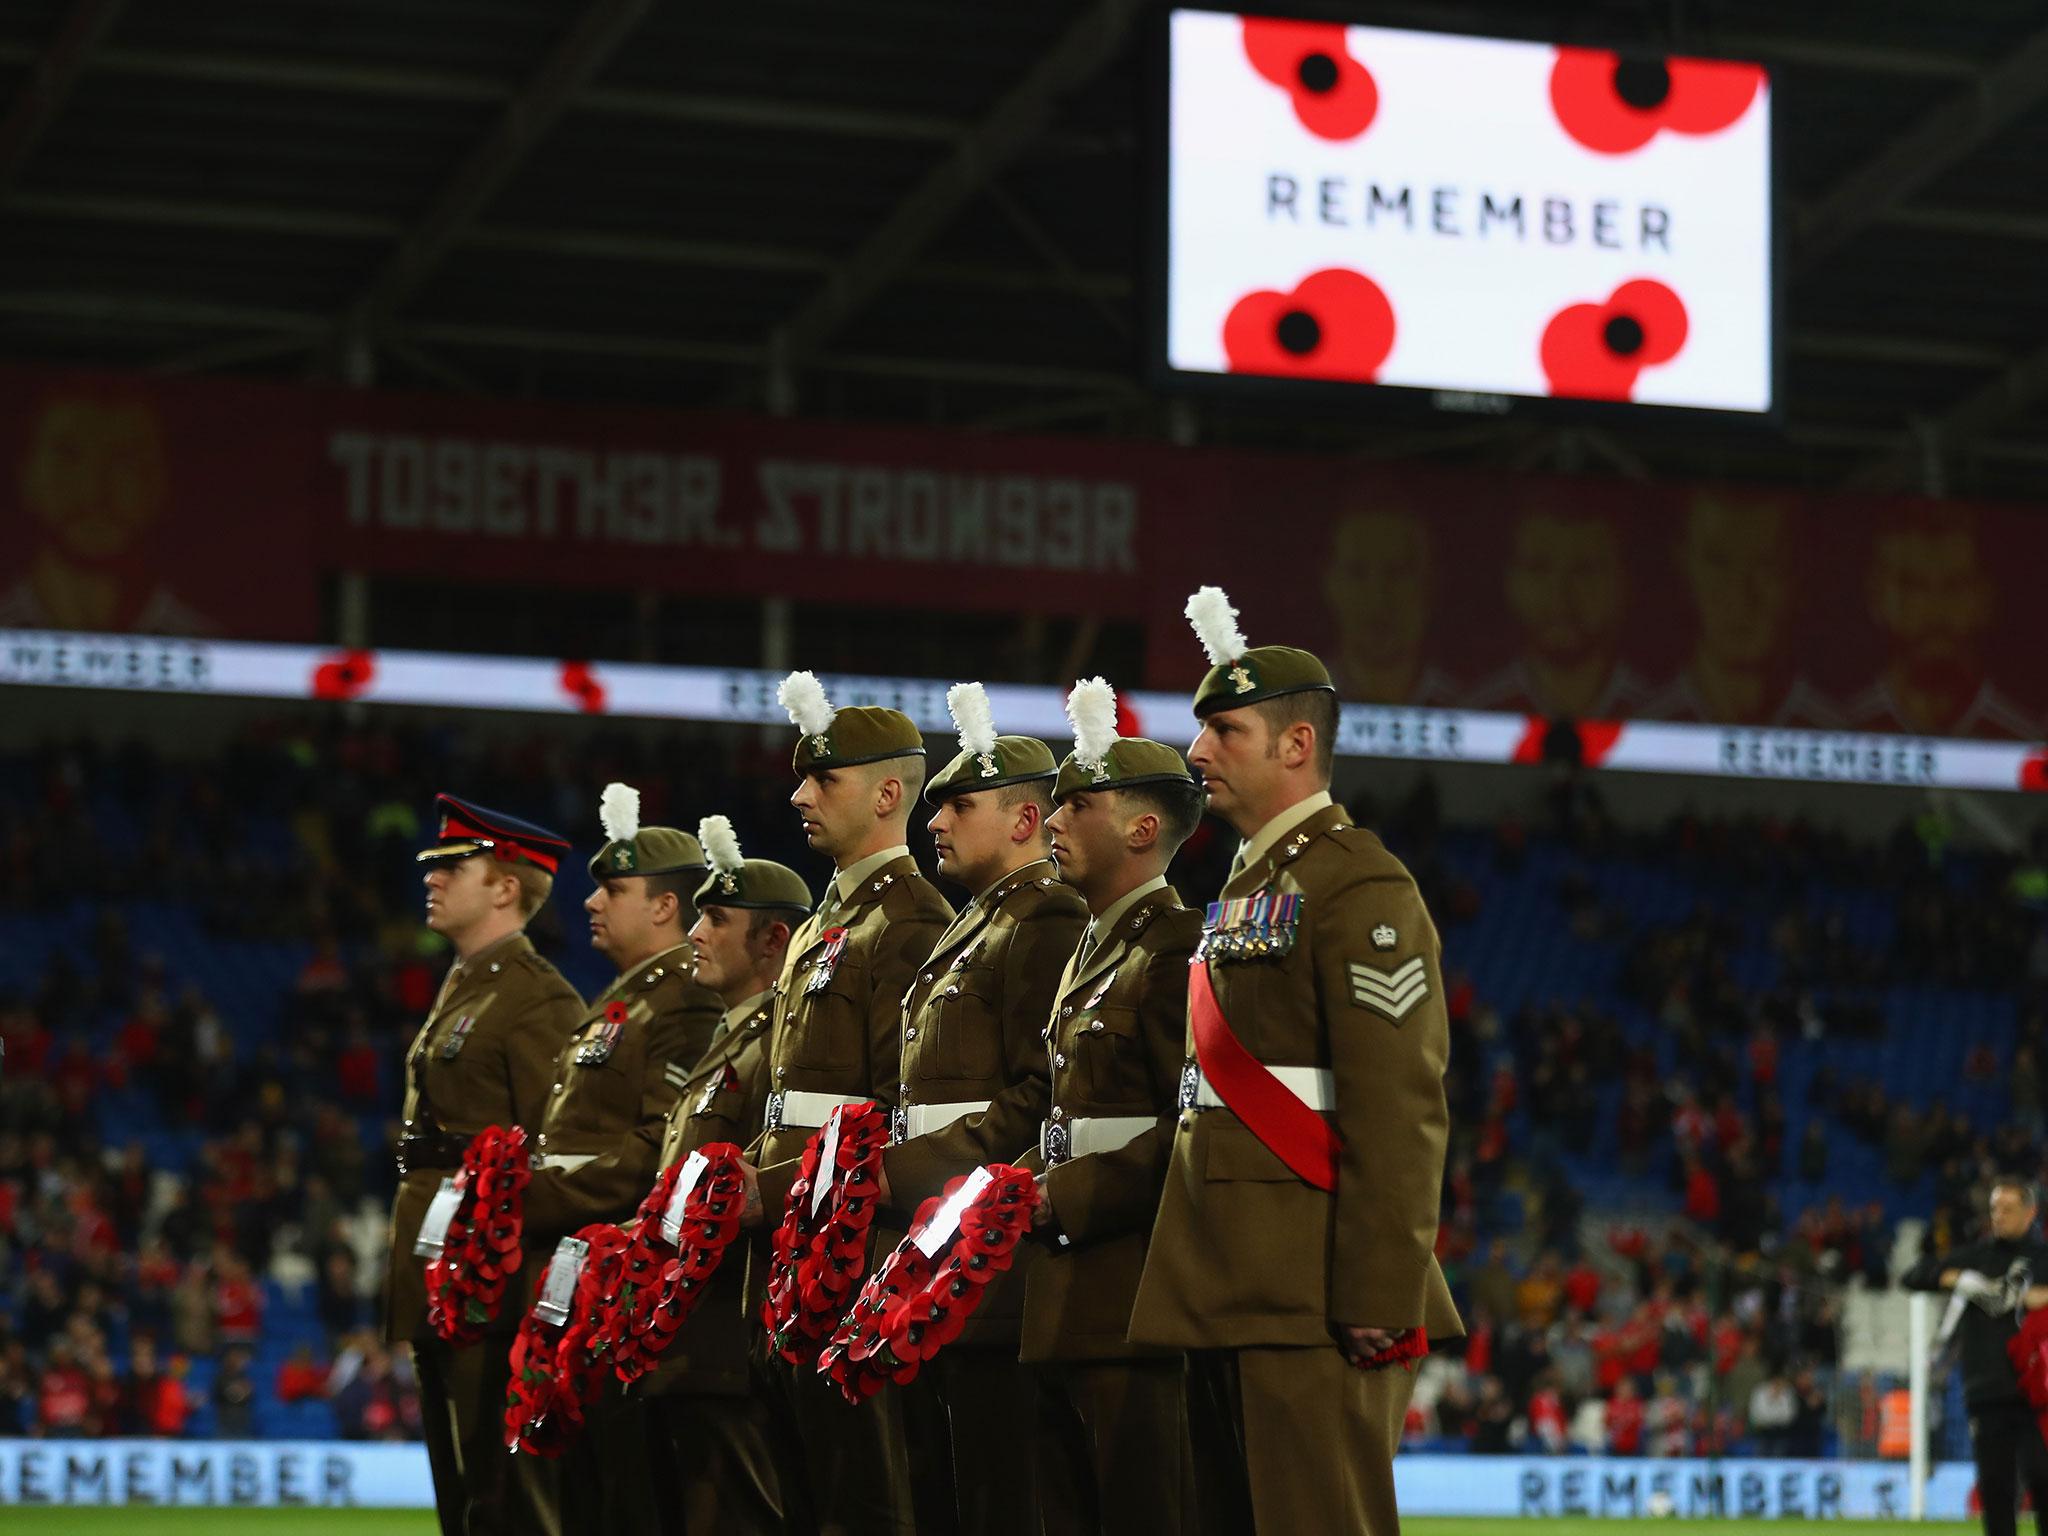 Wales and Northern Ireland face disciplinary action from Fifa after displaying poppies at matches earlier this month